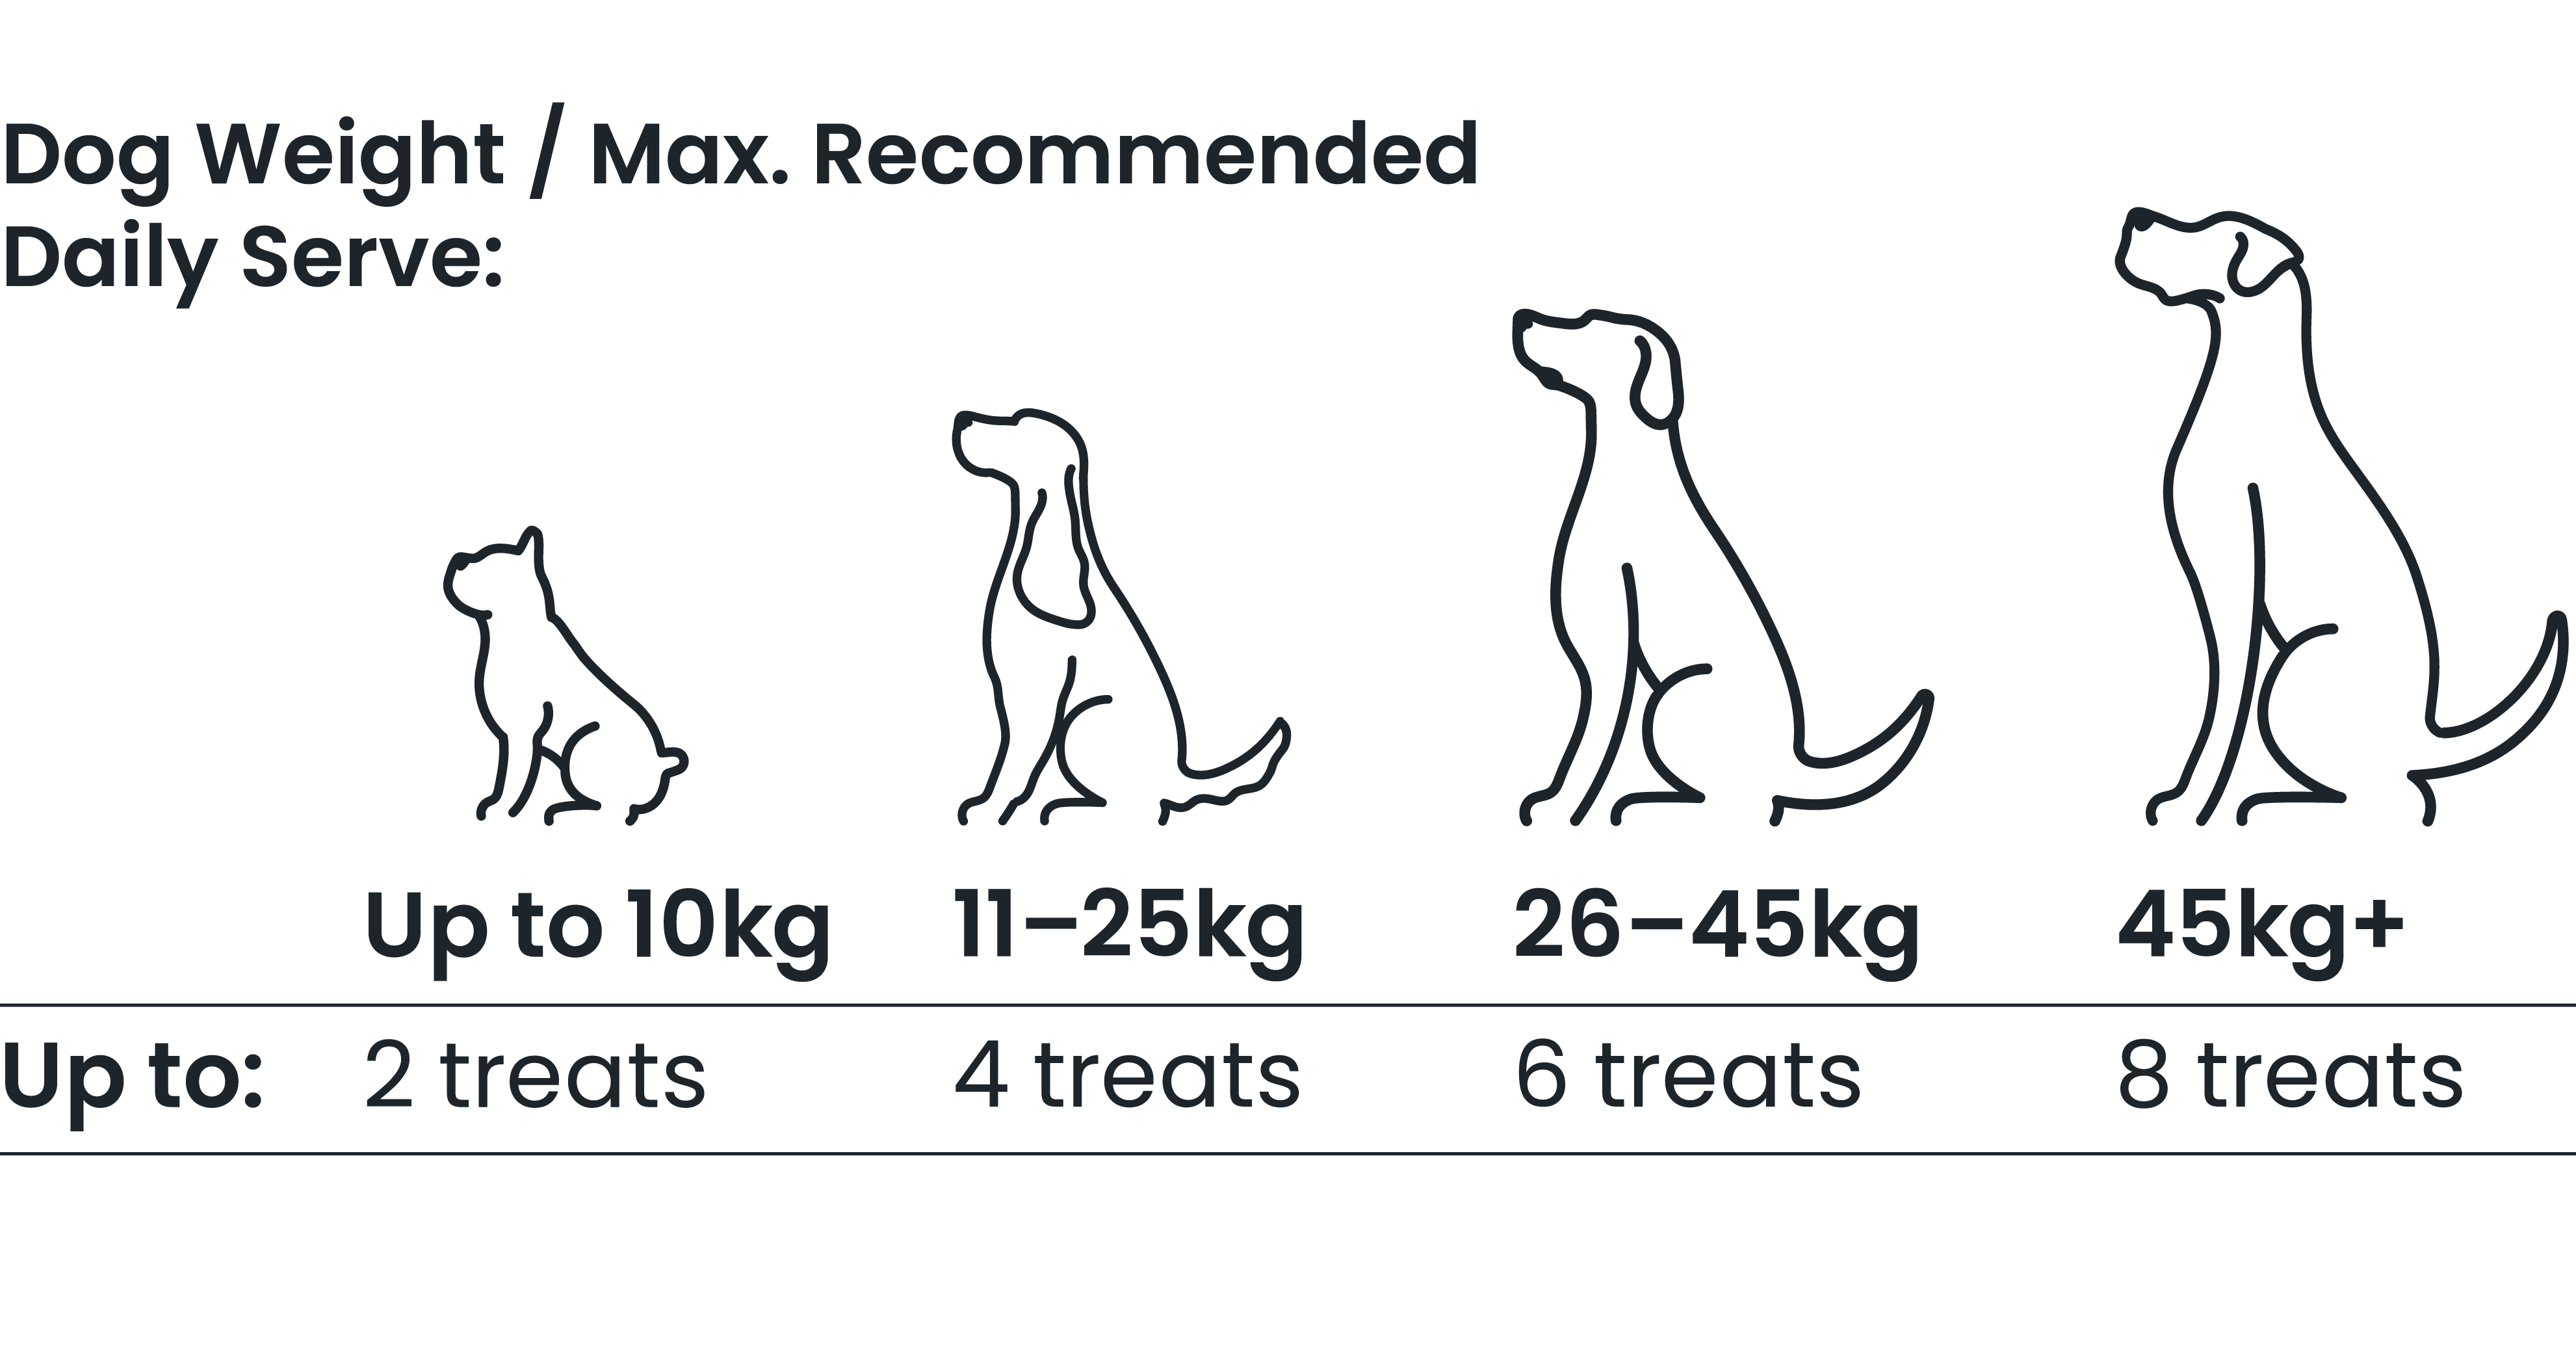 ZamiPet HappiTreats Digestion feeding guide. For dogs up to 10kg, max 2 treats per day. For 11kg-25kg dogs, up to 4 treats per day. For 26-45kg dogs, up to 6 treats per day. For dogs 45kg and over, up to 8 treats per day. 